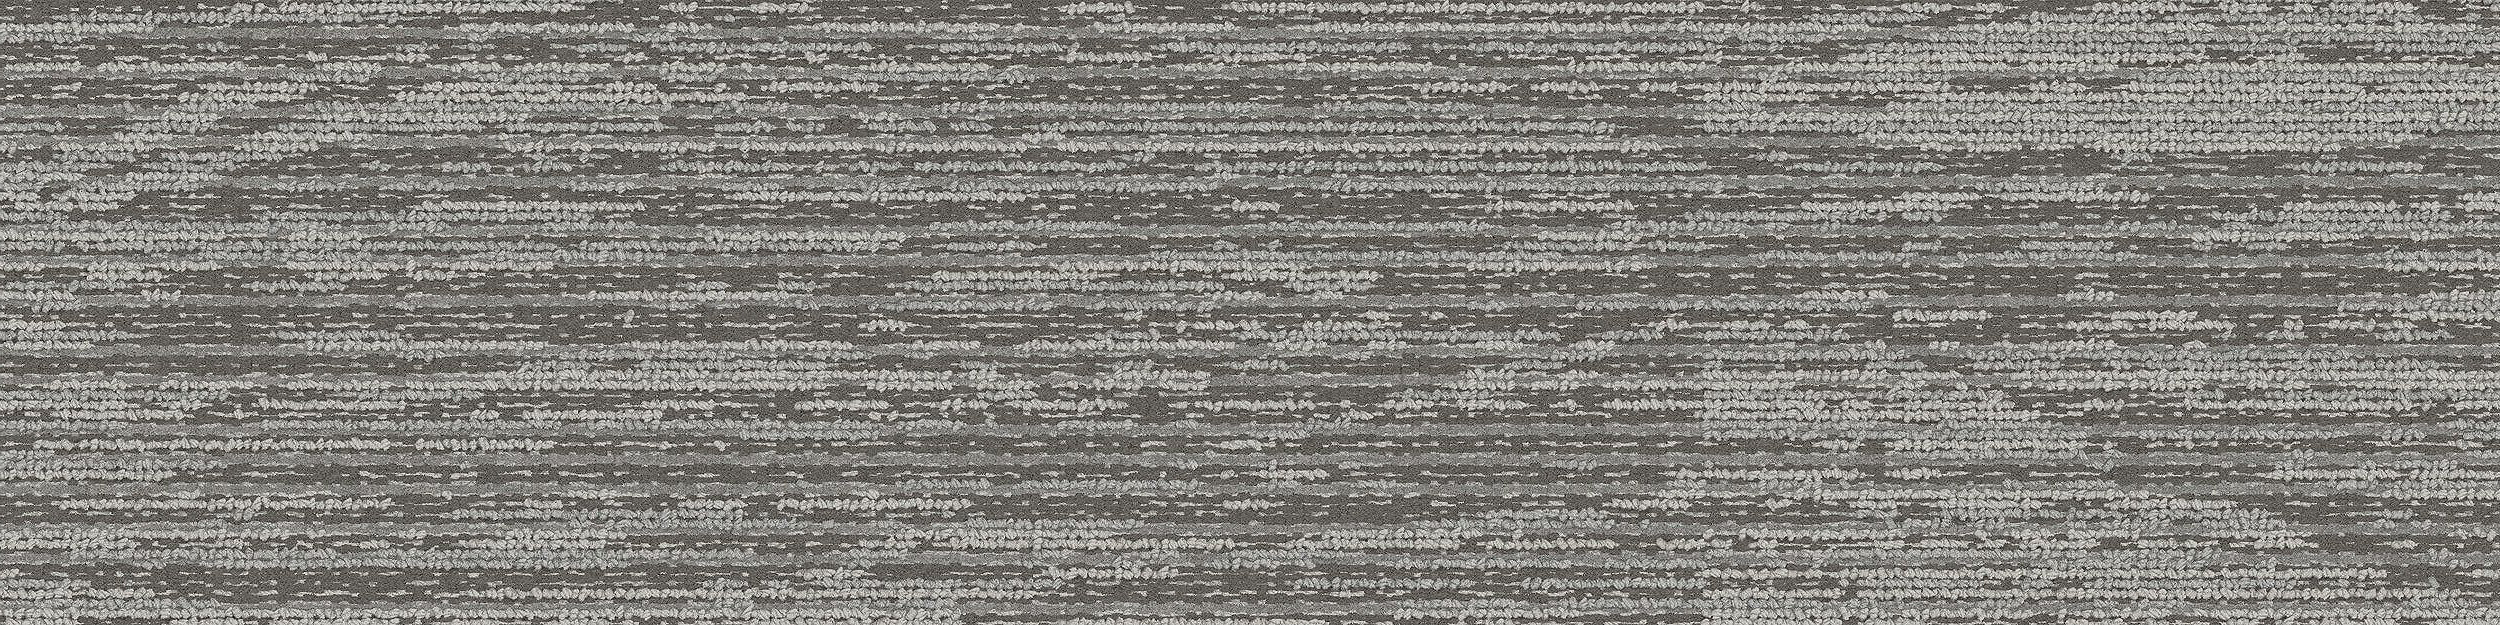 RMS 507 Carpet Tile In Taffy image number 6